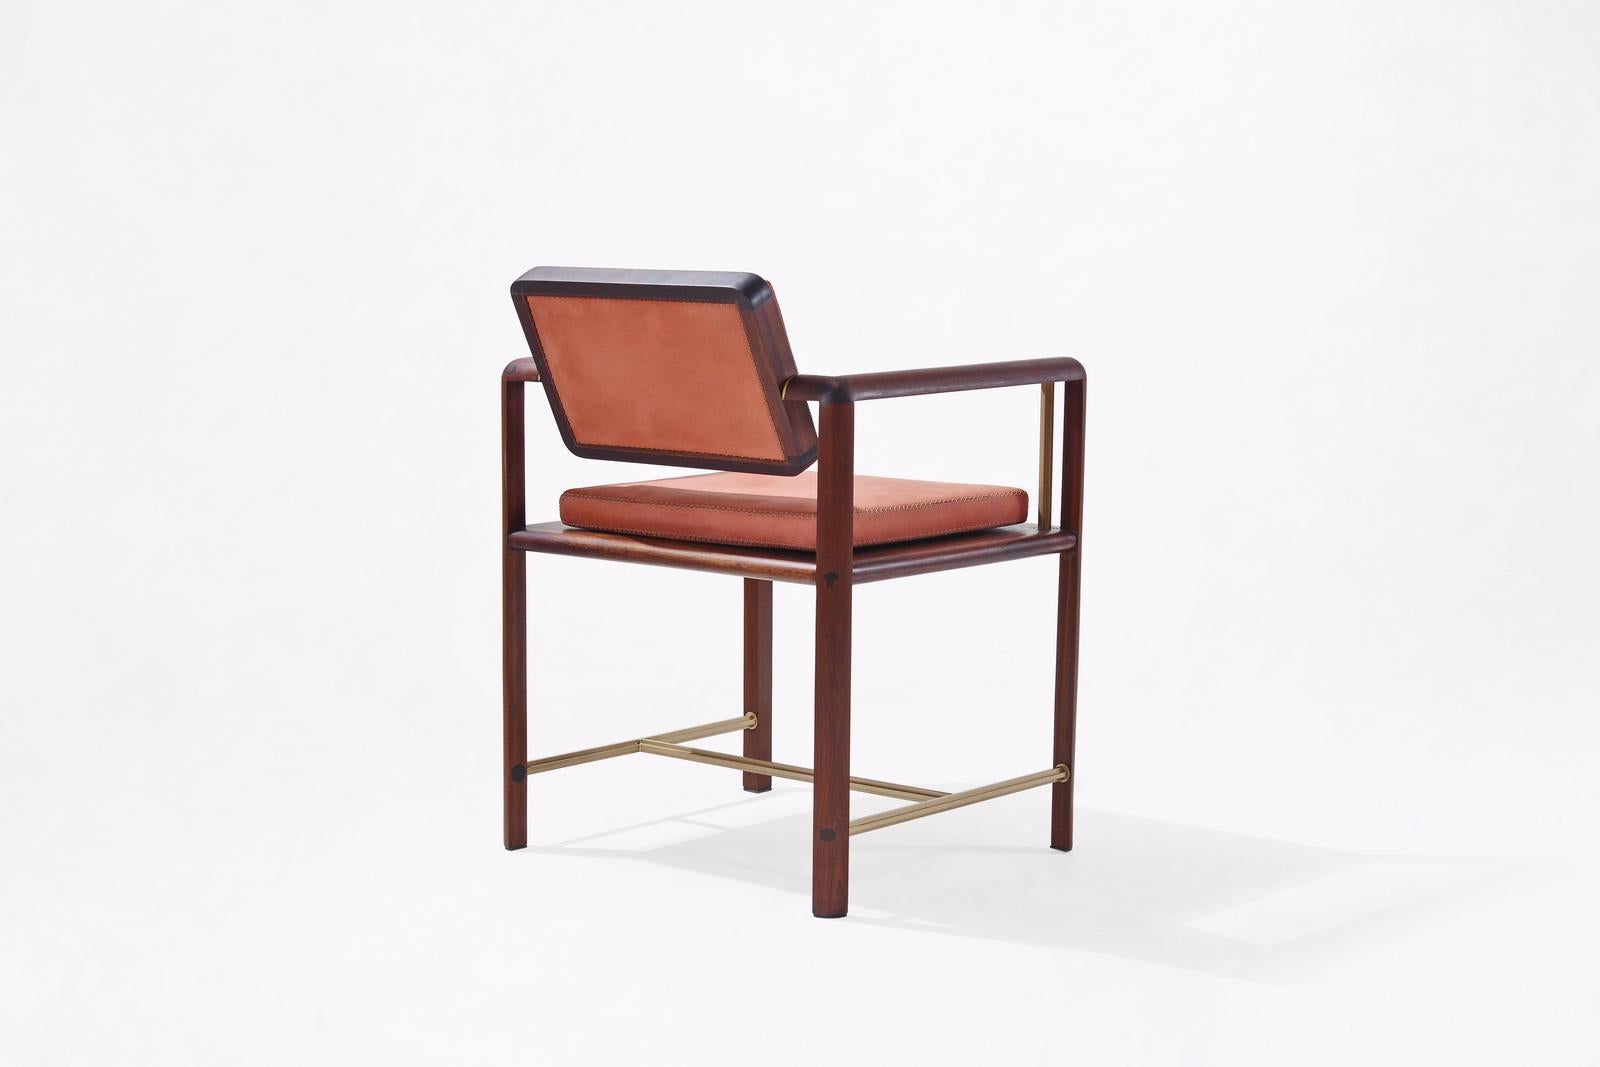 Bespoke Chair Reclaimed Hardwood Handstitched Leather Seating, P. Tendercool In New Condition For Sale In Bangkok, TH